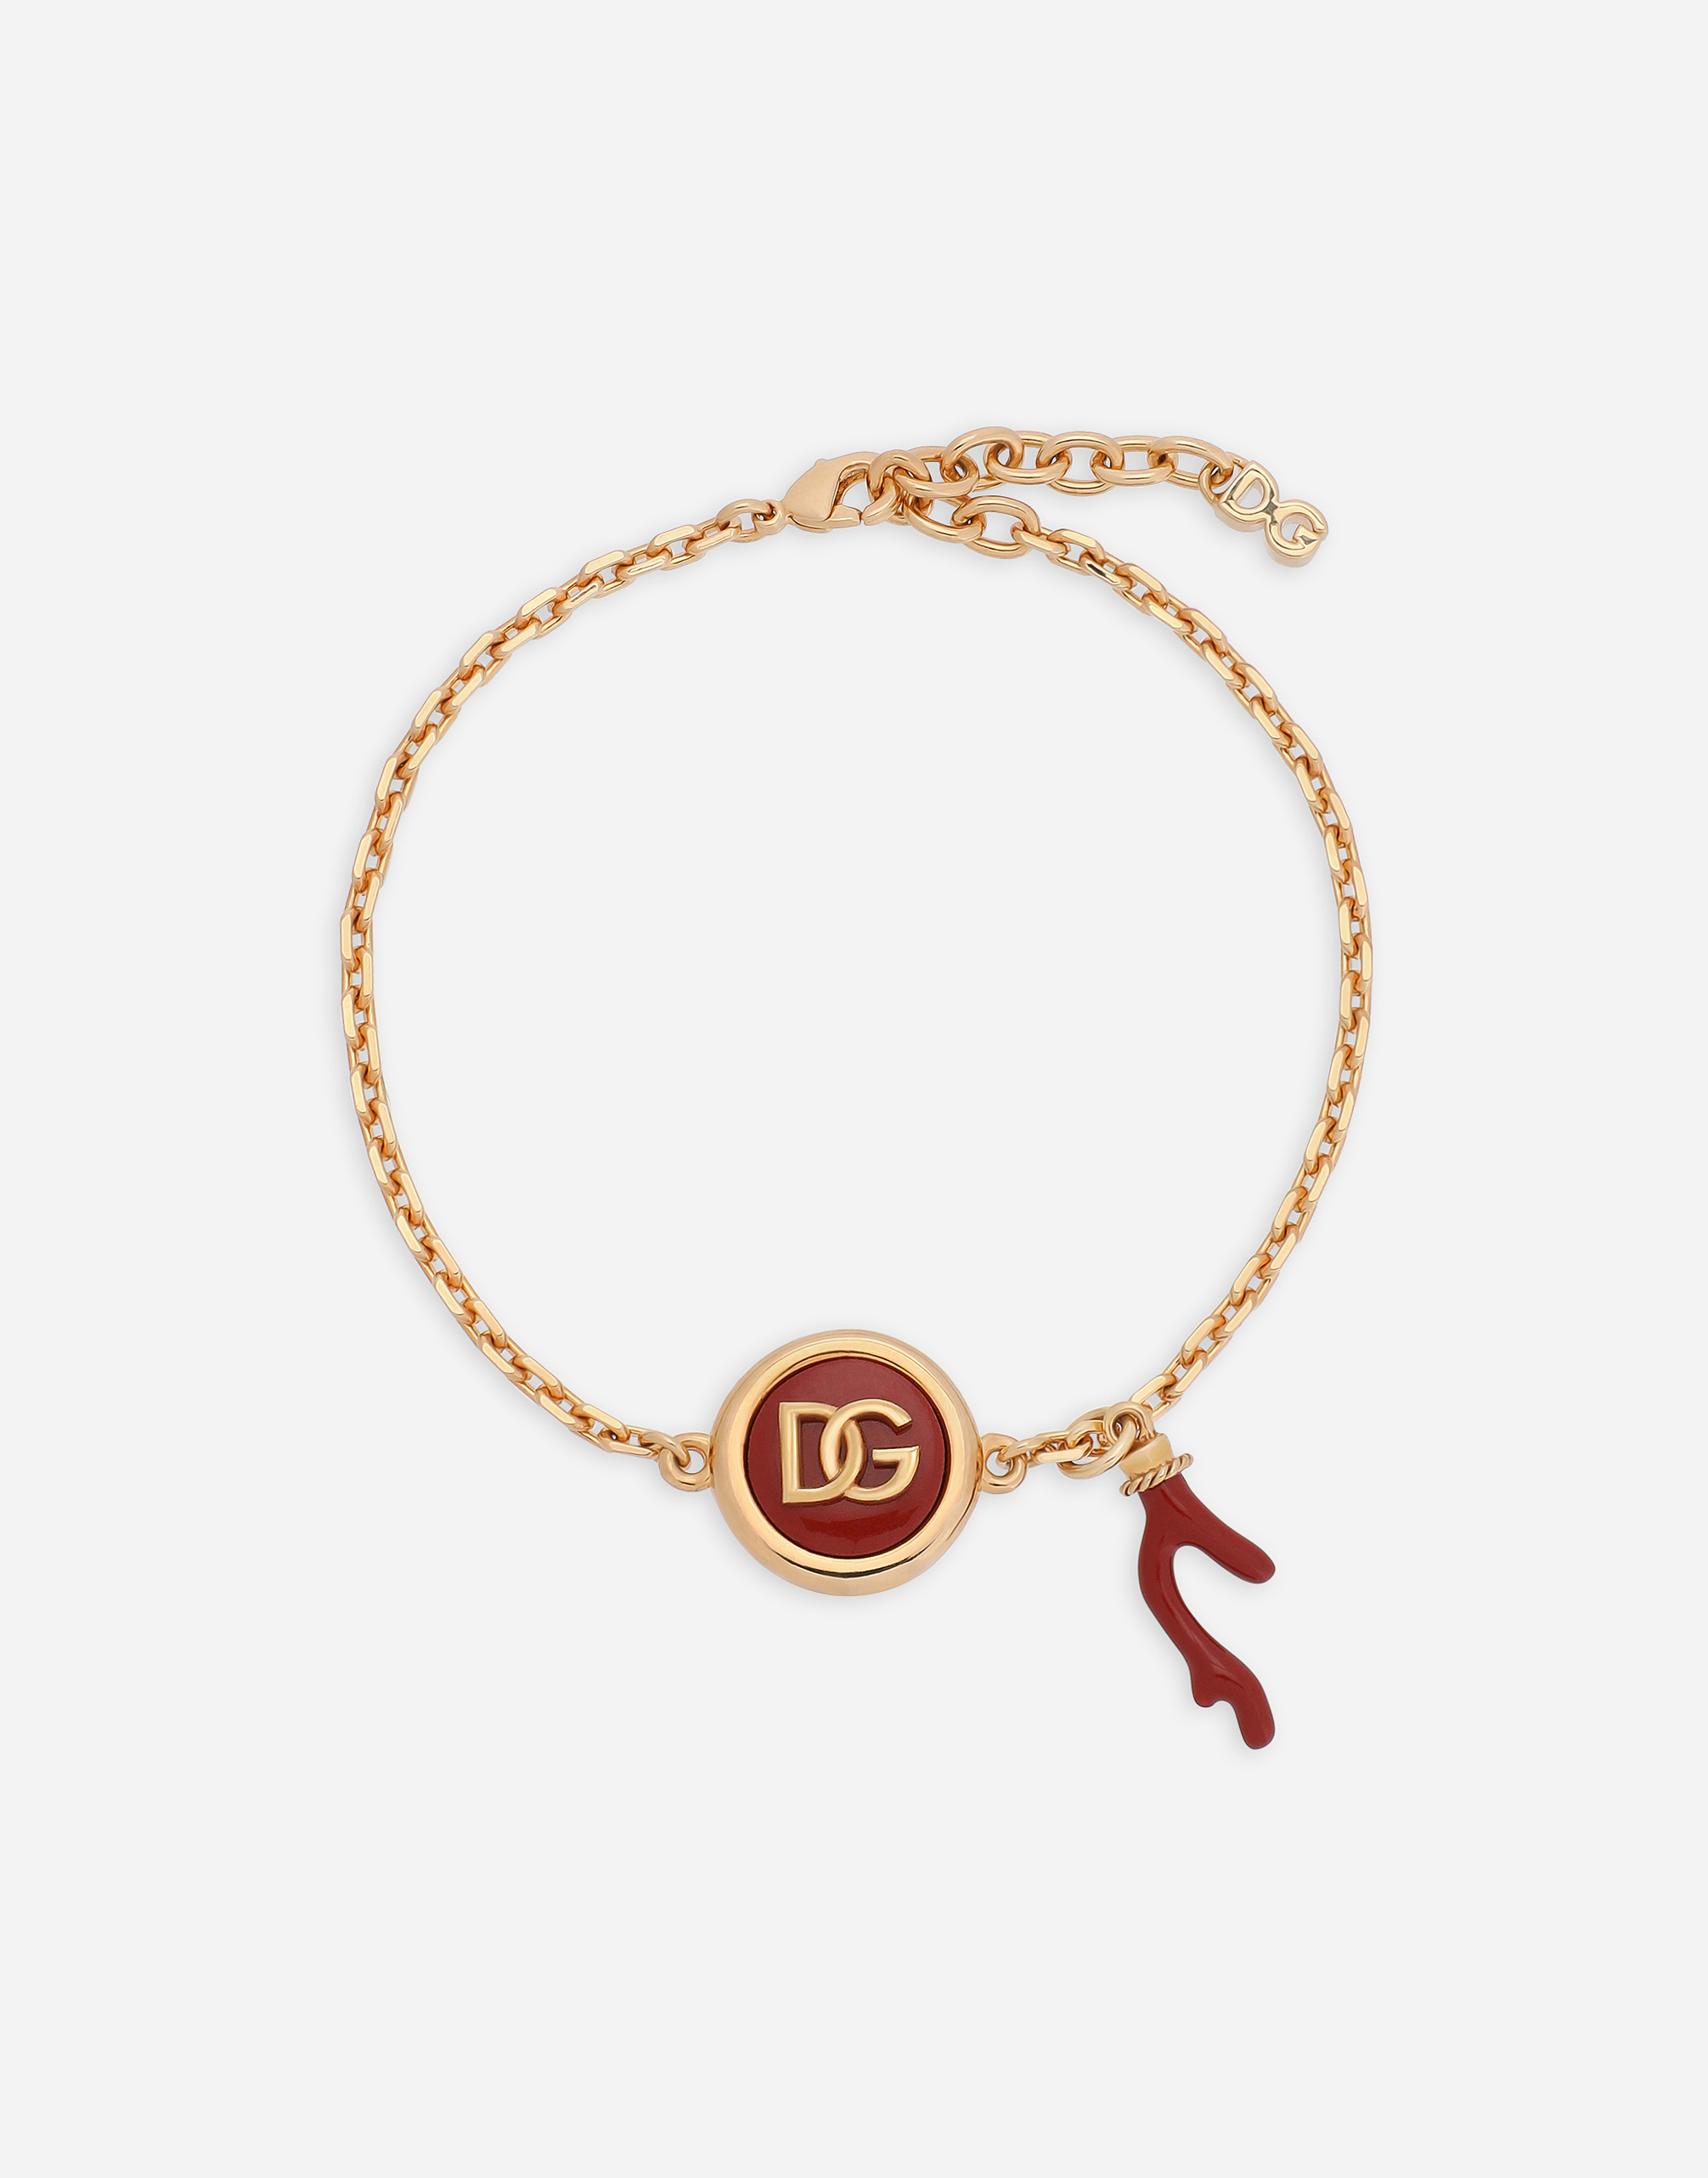 Bracelet with resin coral and DG logo embellishment in Gold